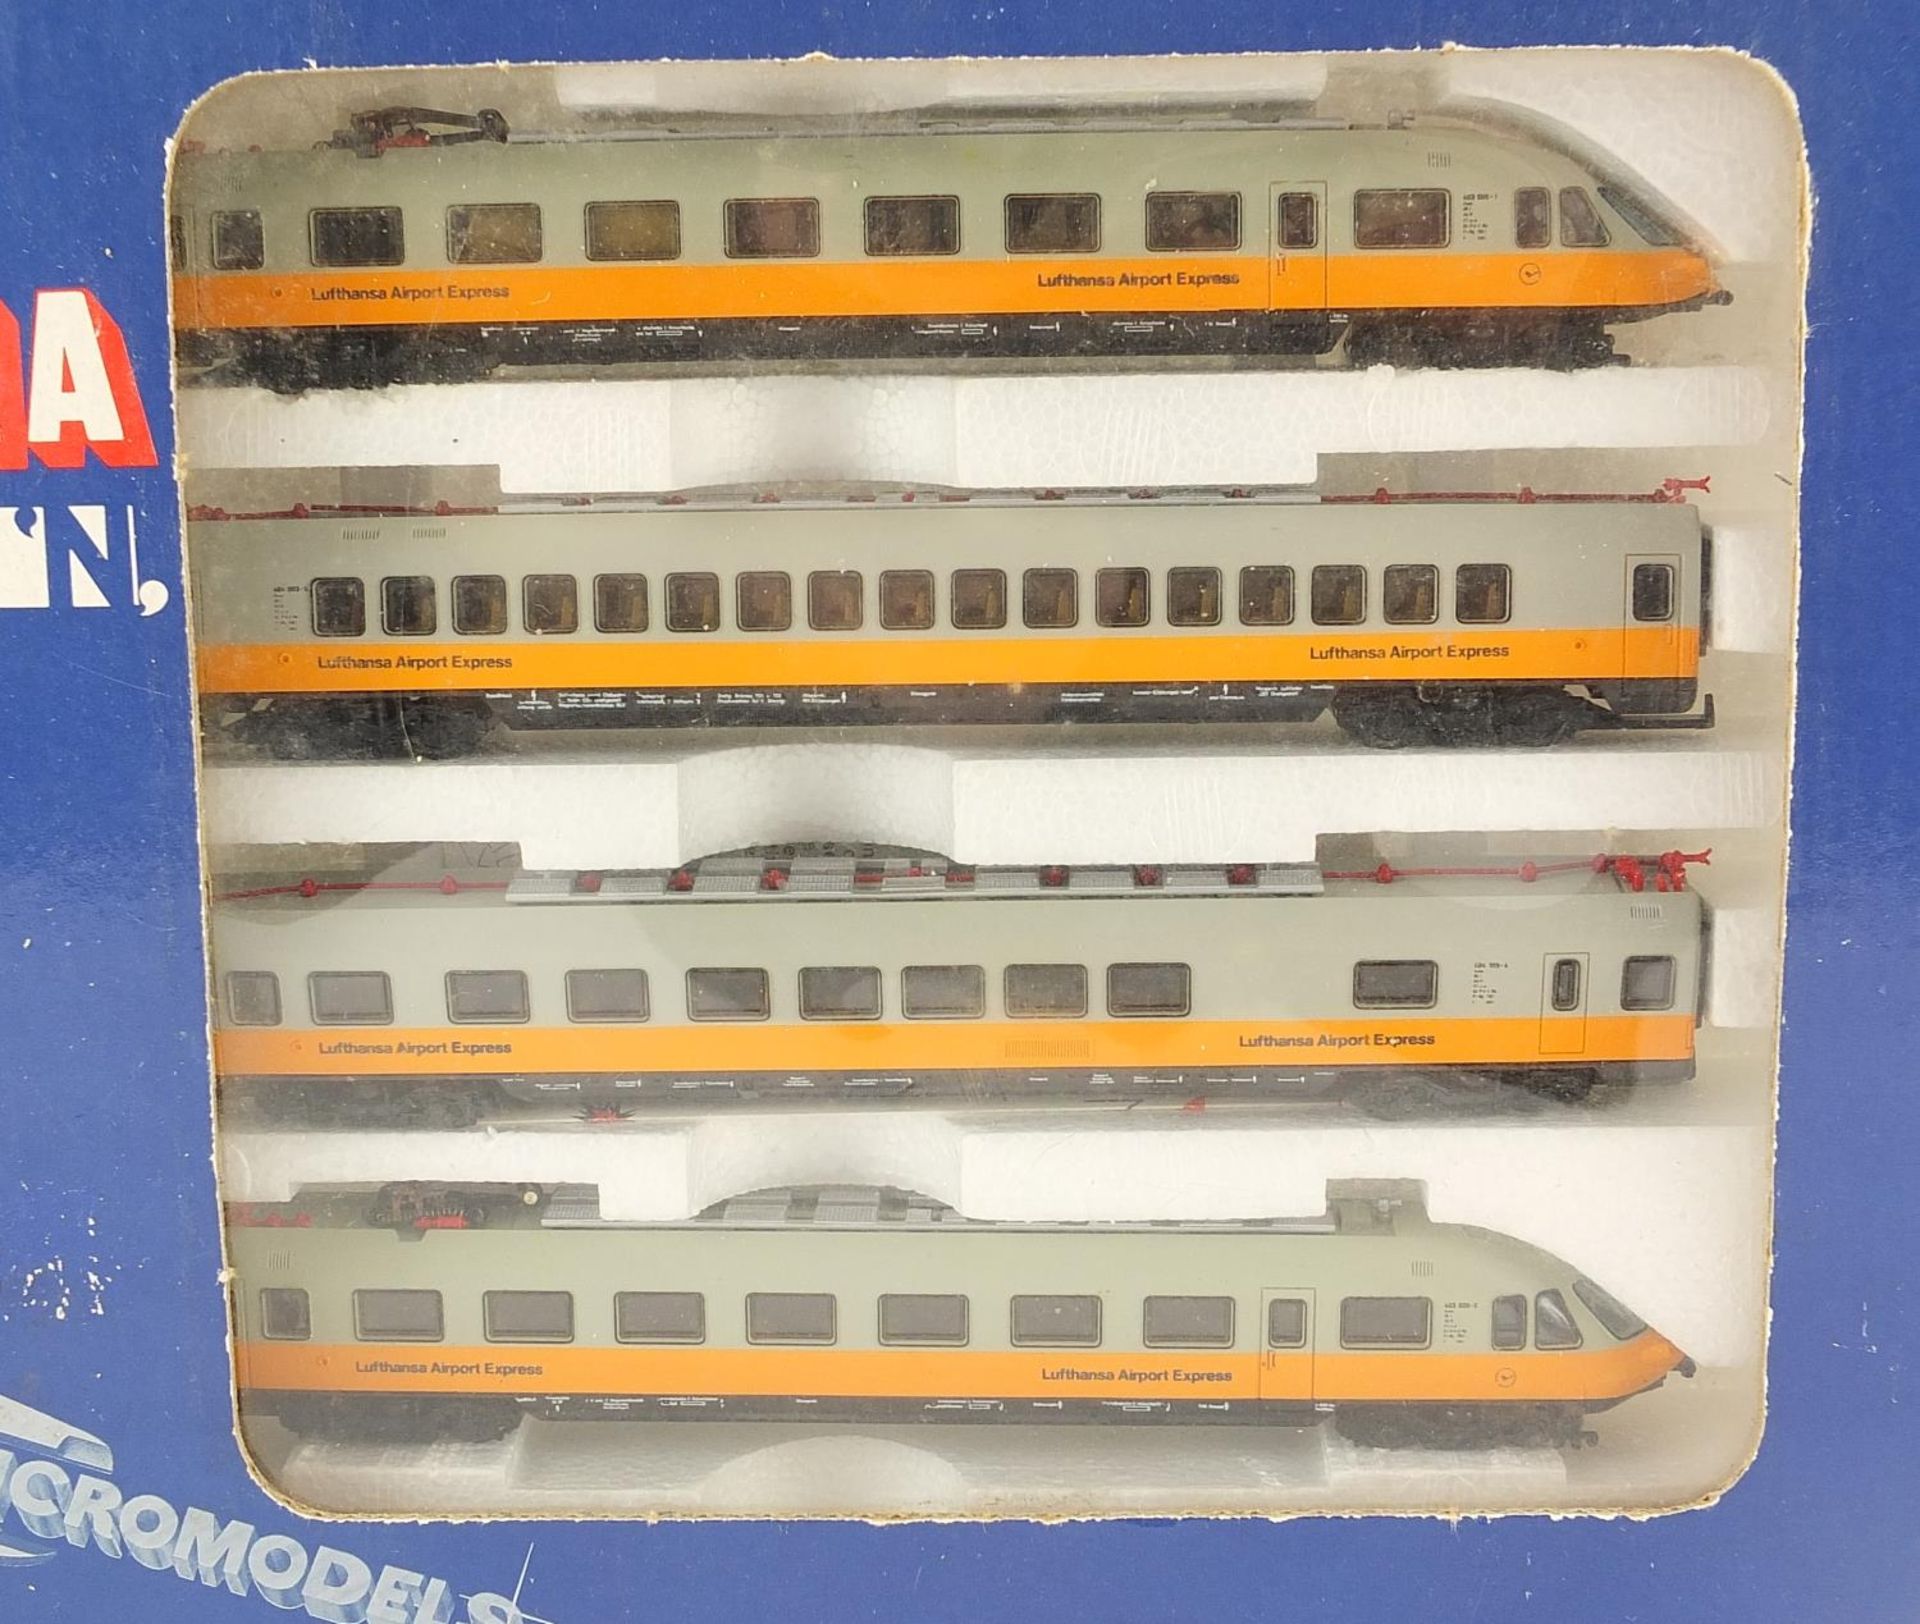 Lima N gauge model railway locomotive sets with boxes comprising four car numbered 163902 and - Image 2 of 3